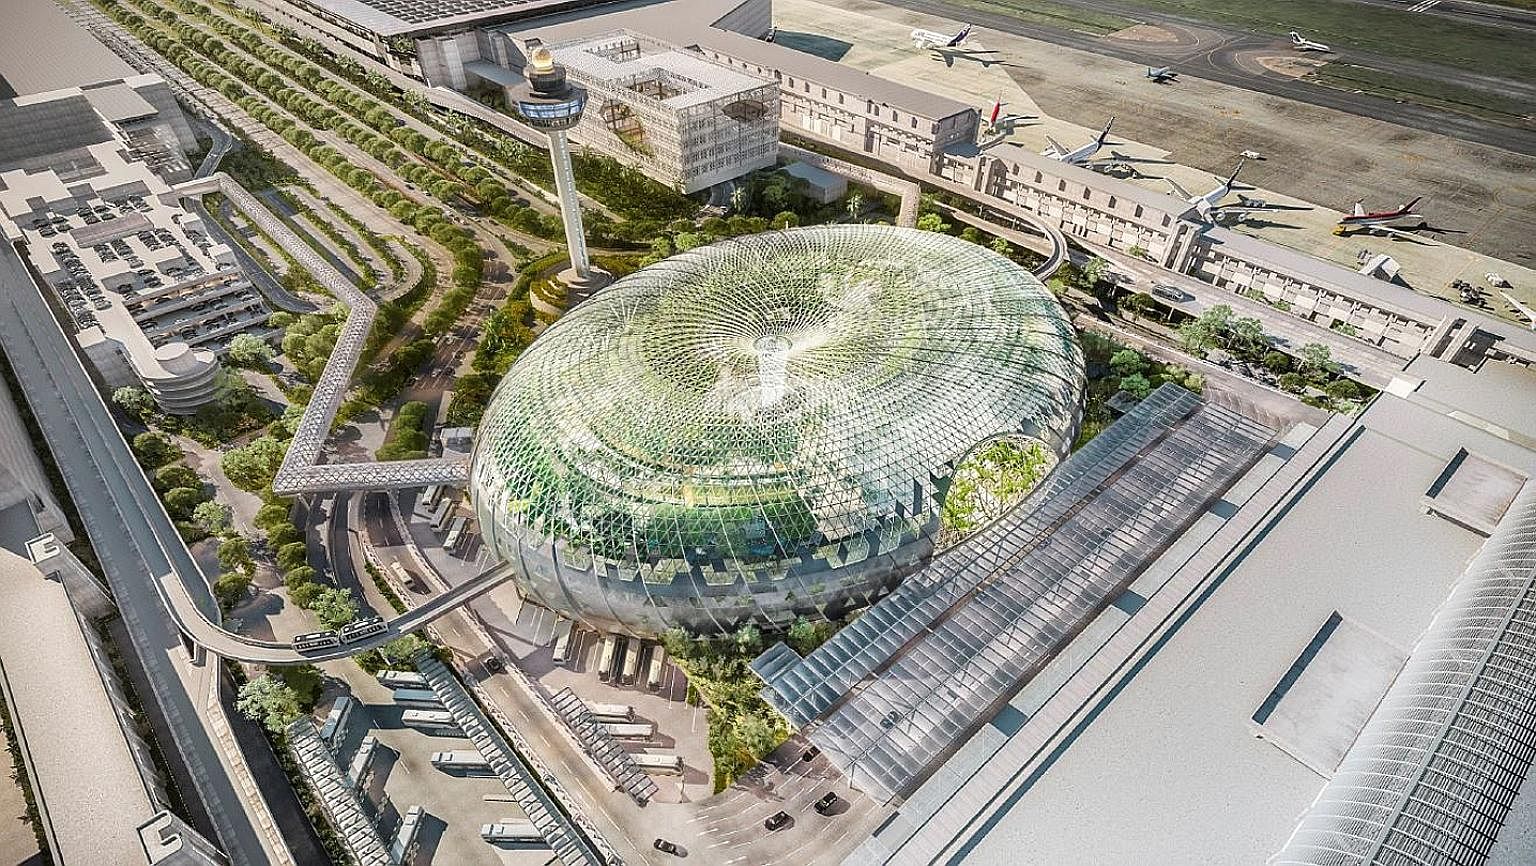 Jewel, Changi Airport's new lifestyle and retail hub which will open in early 2019, will feature Singapore's largest indoor garden, sky nets, slides and mazes on top of dining and retail outlets.